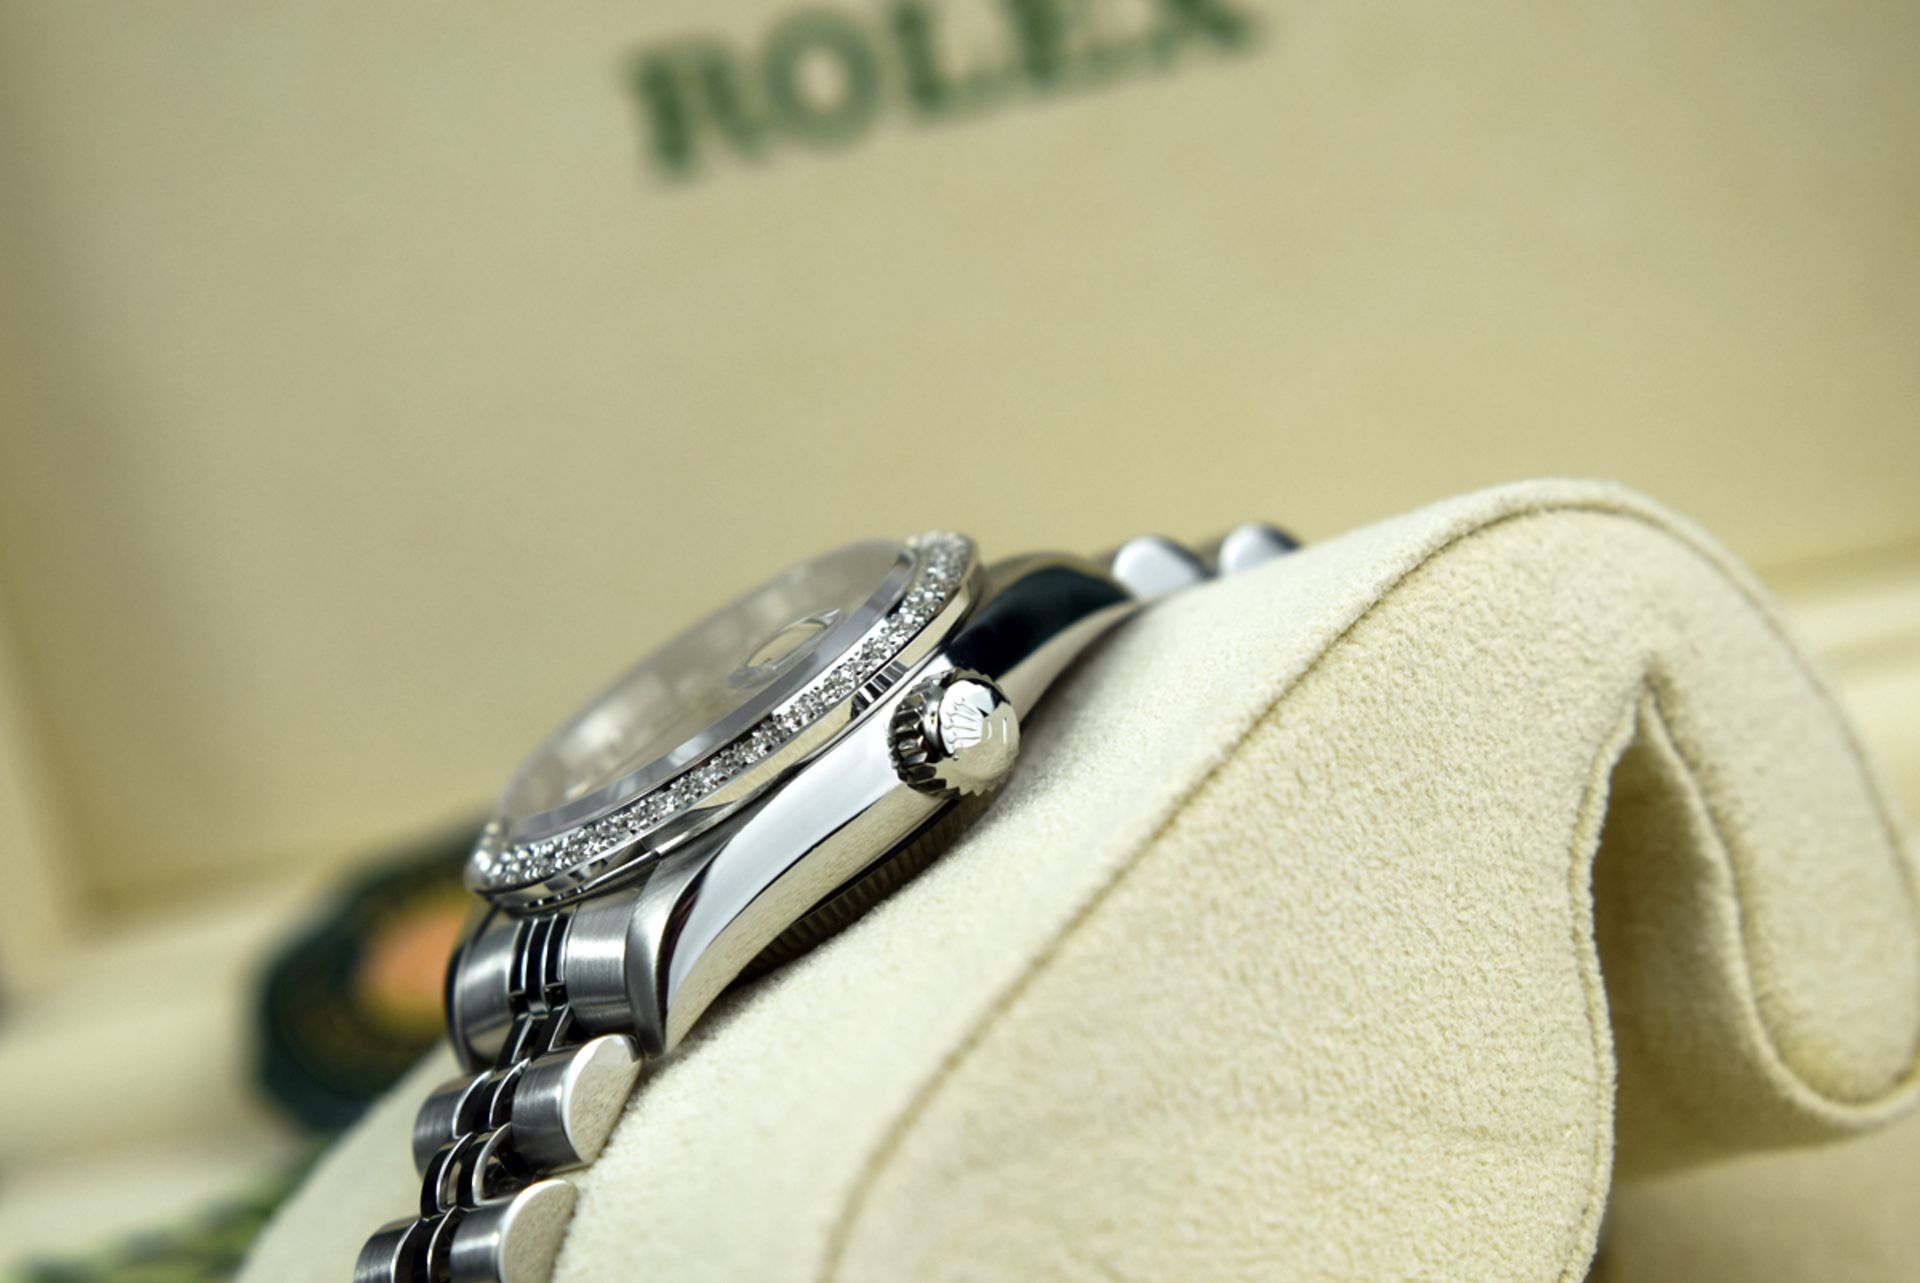 ROLEX *DIAMOND* LADY DATEJUST - 18K WHITE GOLD & STEEL WITH SILVER GREY DIAMOND DIAL - Image 4 of 12